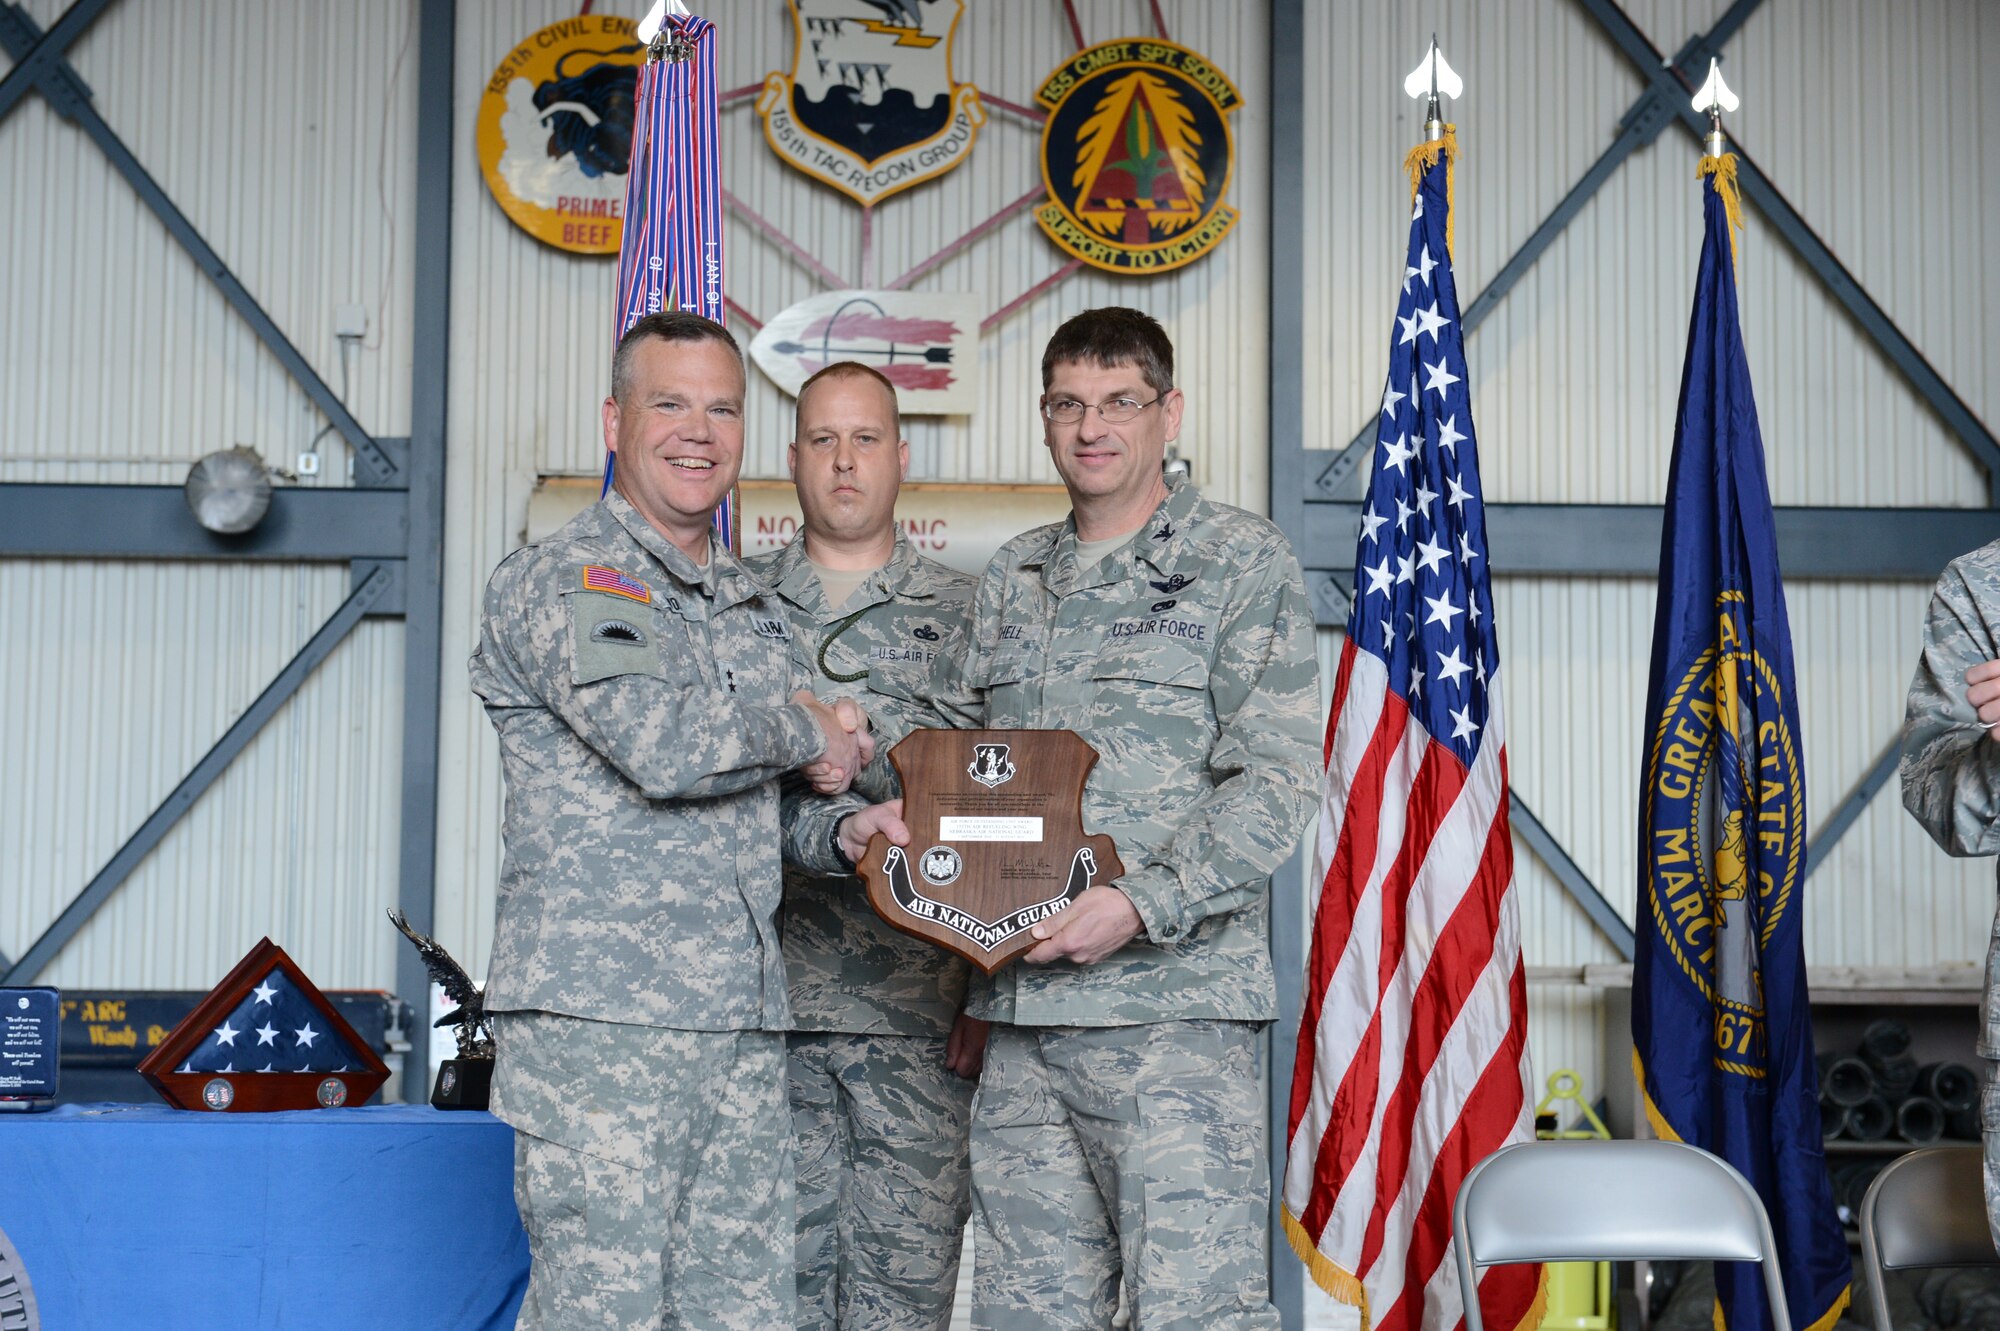 Maj. Gen. Judd Lyons, Nebraska National Giuard's adjutant general, awards Col. Keith Schell, commander of the 155th Air Refueling Wing with an Outstanding Unit award for fiscal year 2012 at the Hometown Heroes Salute ceremony April 6, 2013, at the Nebraska National Guard air base, Lincoln, Neb. The purpose of the ceremony is to honor family members and unit members who had deployed, for their sacrifices made.